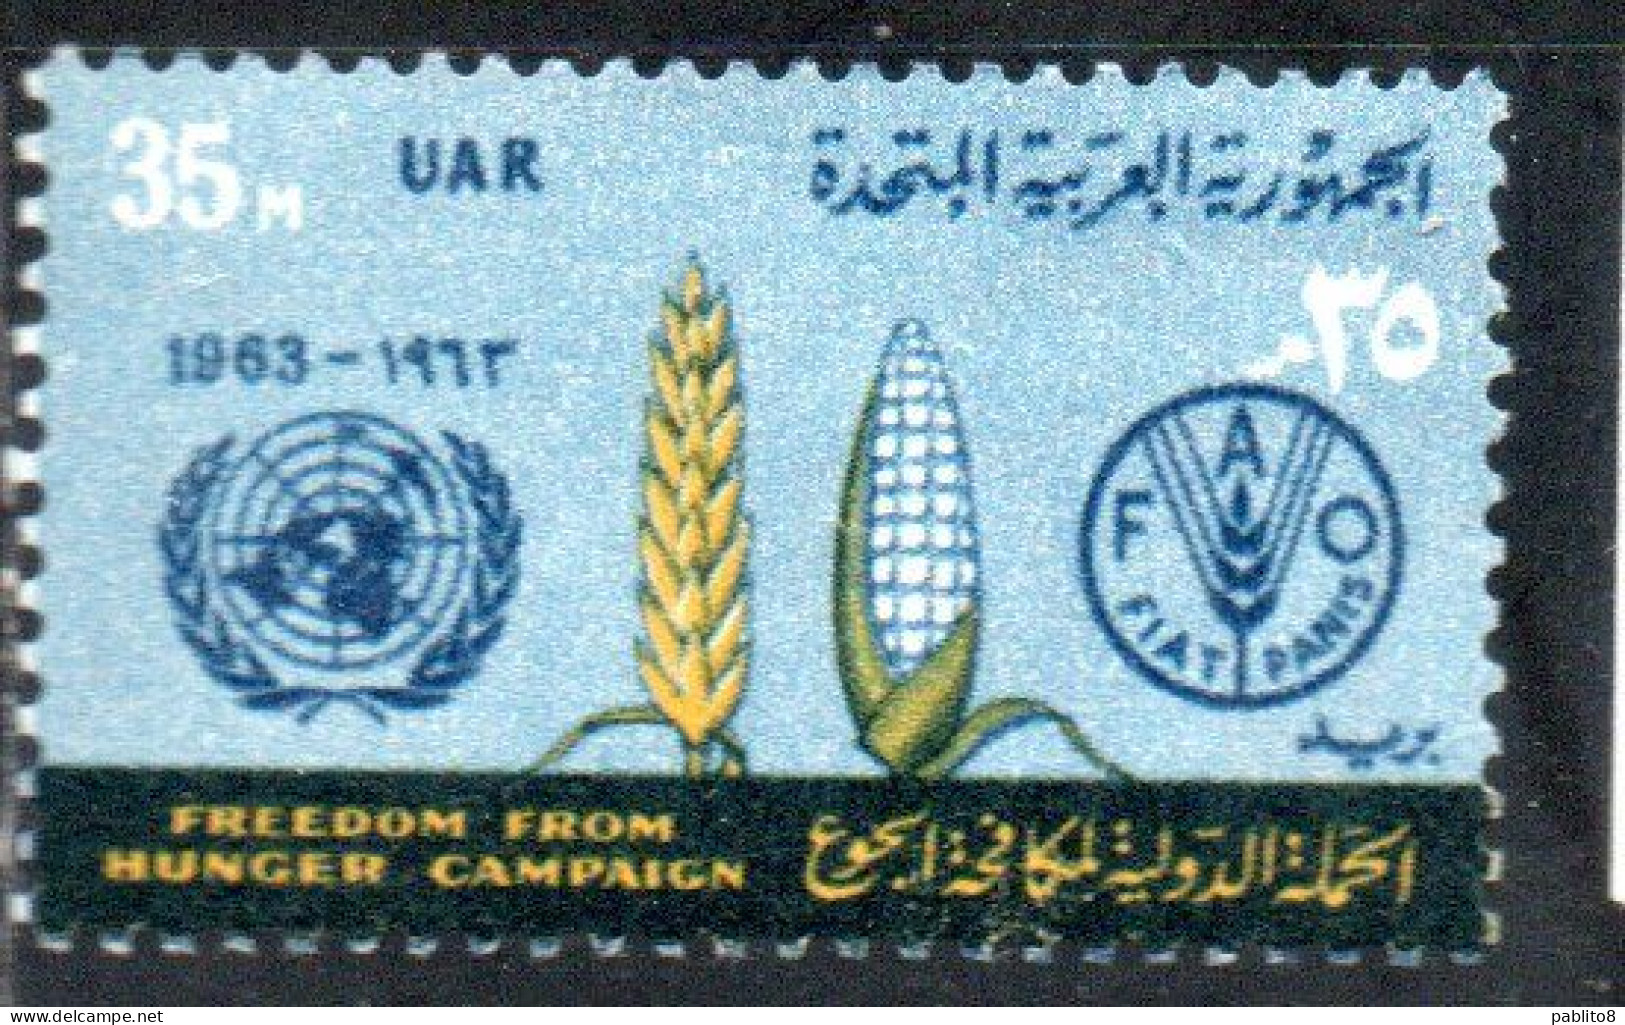 UAR EGYPT EGITTO 1963 FAO FREEDOM FROM HUNGER CAMPAIGN WHEAT CORN AND EMBLEMS 35m  MNH - Ongebruikt